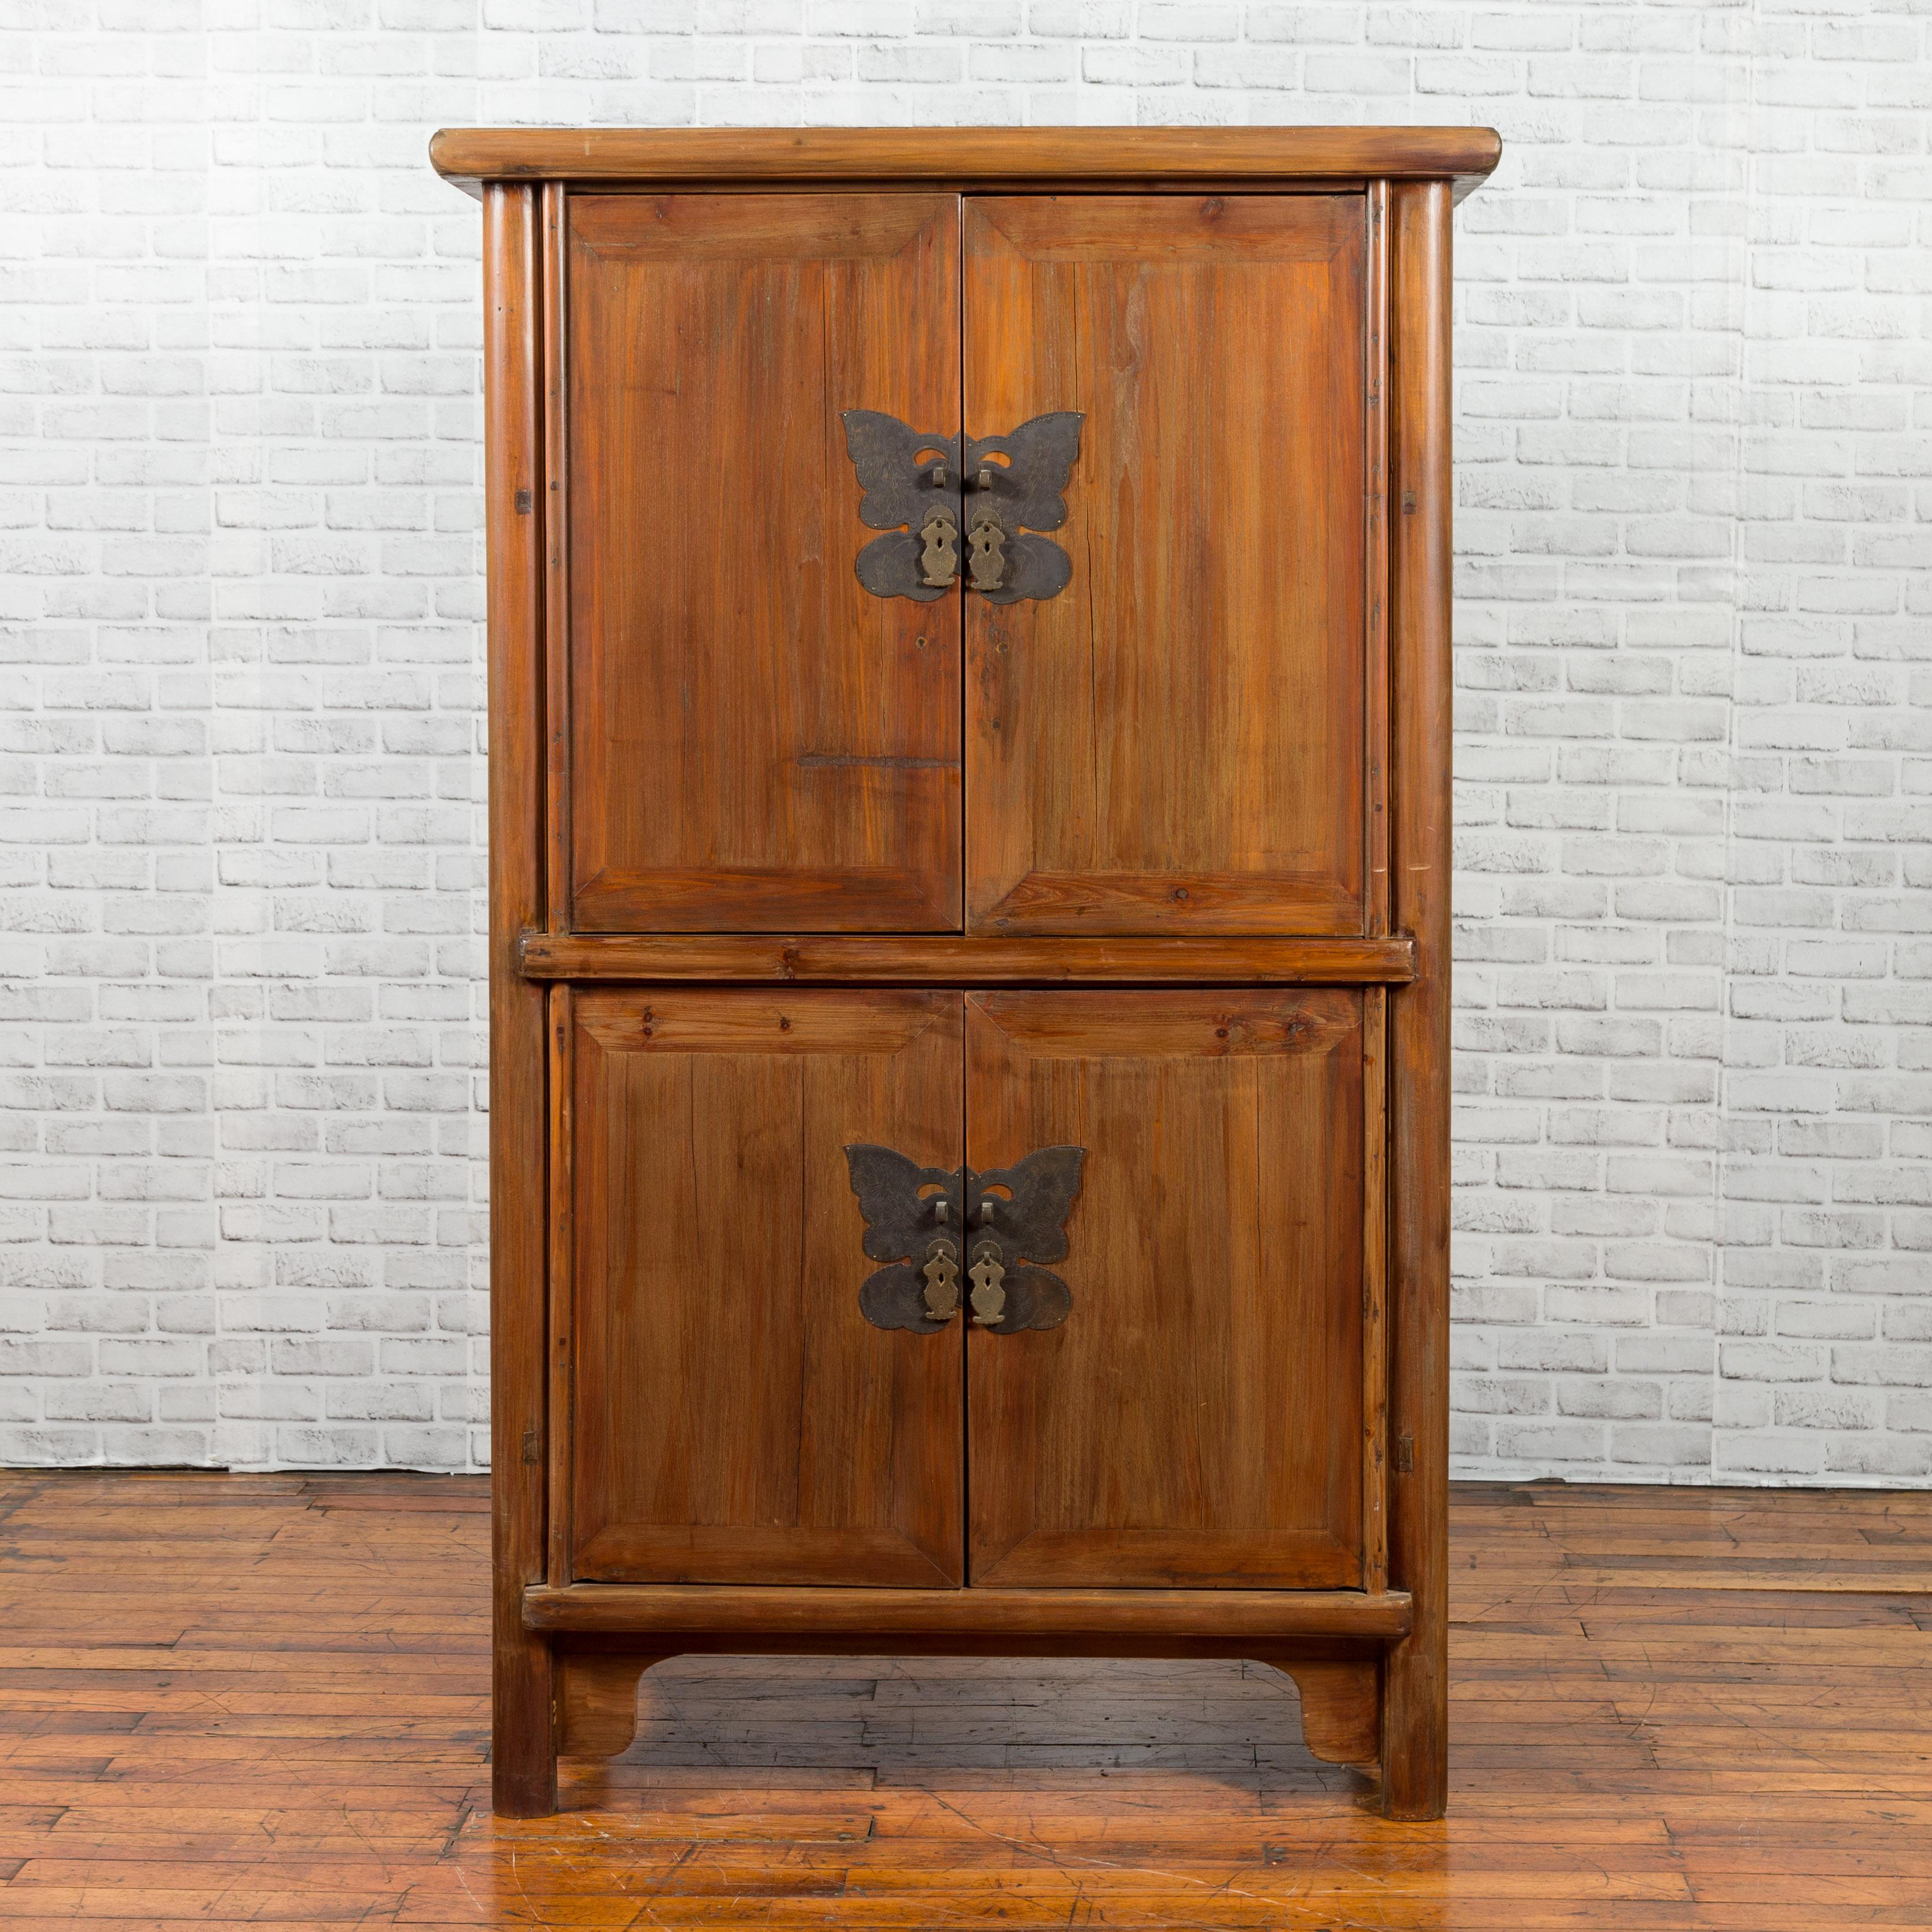 A Chinese Qing Dynasty wedding cabinet from the 19th century, with two pairs of double doors and large butterfly hardware. Created in China during the Qing Dynasty, this wedding cabinet features two pairs of double doors, each fitted with a cut-out